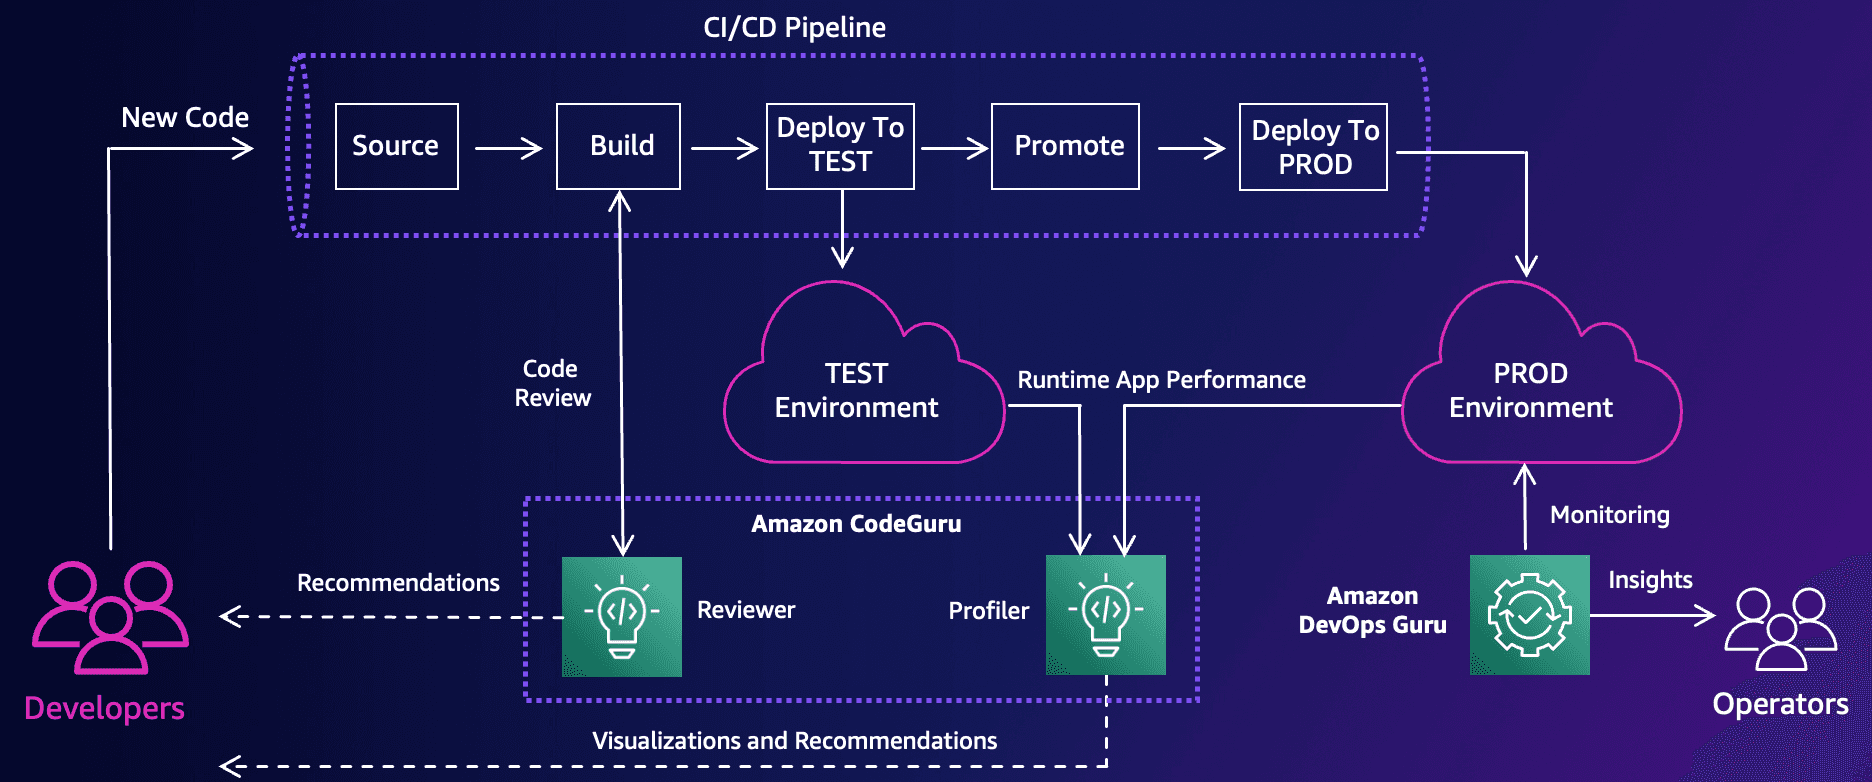 Slide from presentation at AWS Berlin Summit 2022 showing the CI/CD pipeline where CodeGuru sits in the build and test phase